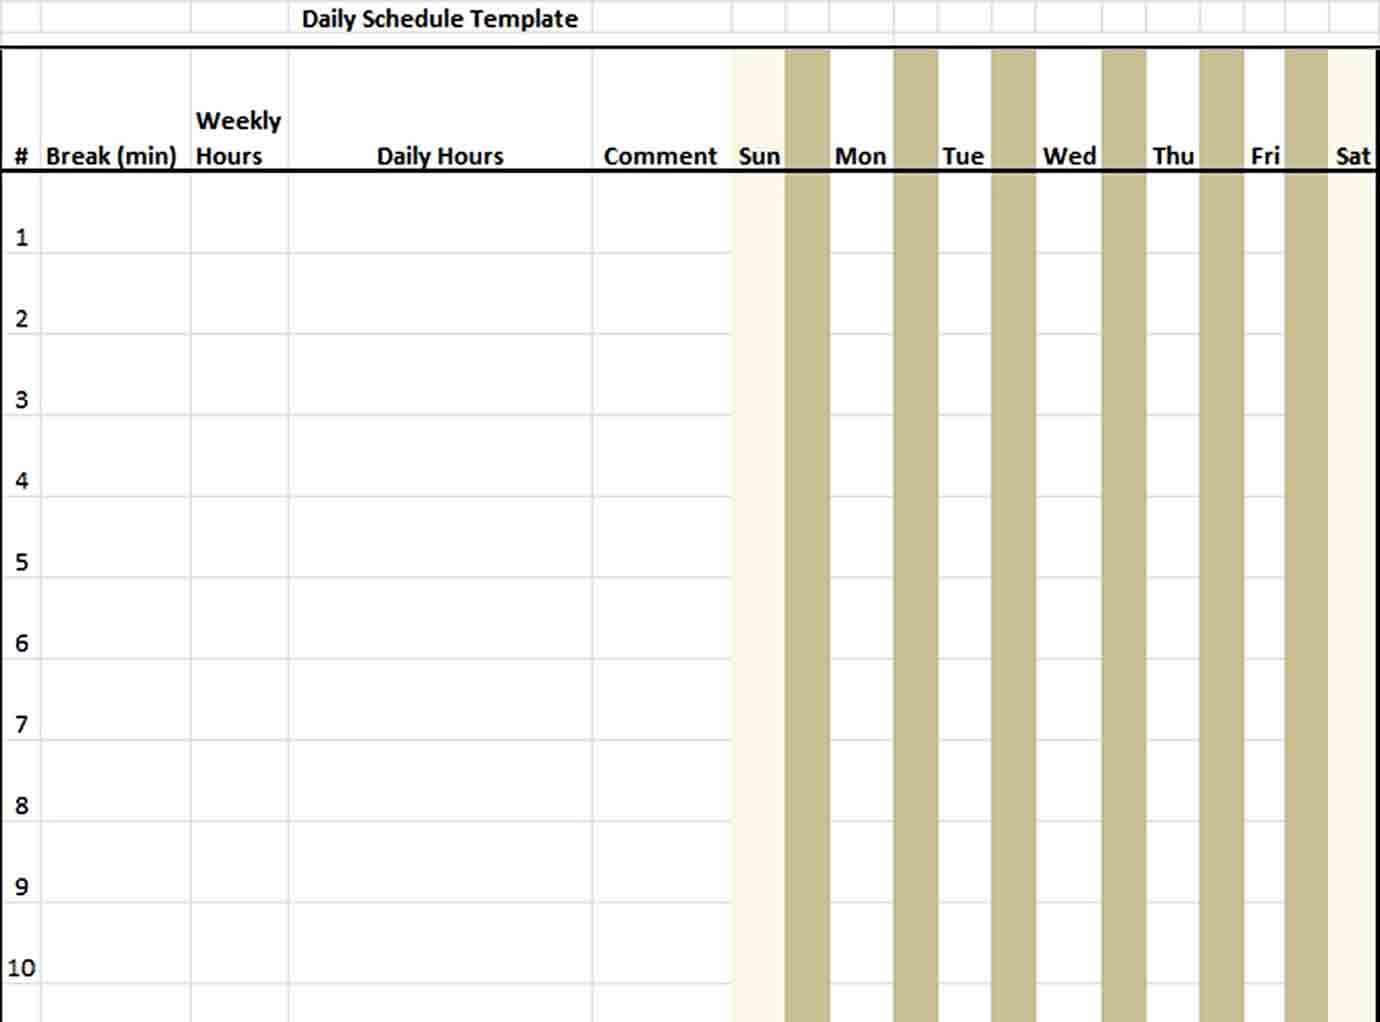 Download 7 Day Schedule Template in Excel Format